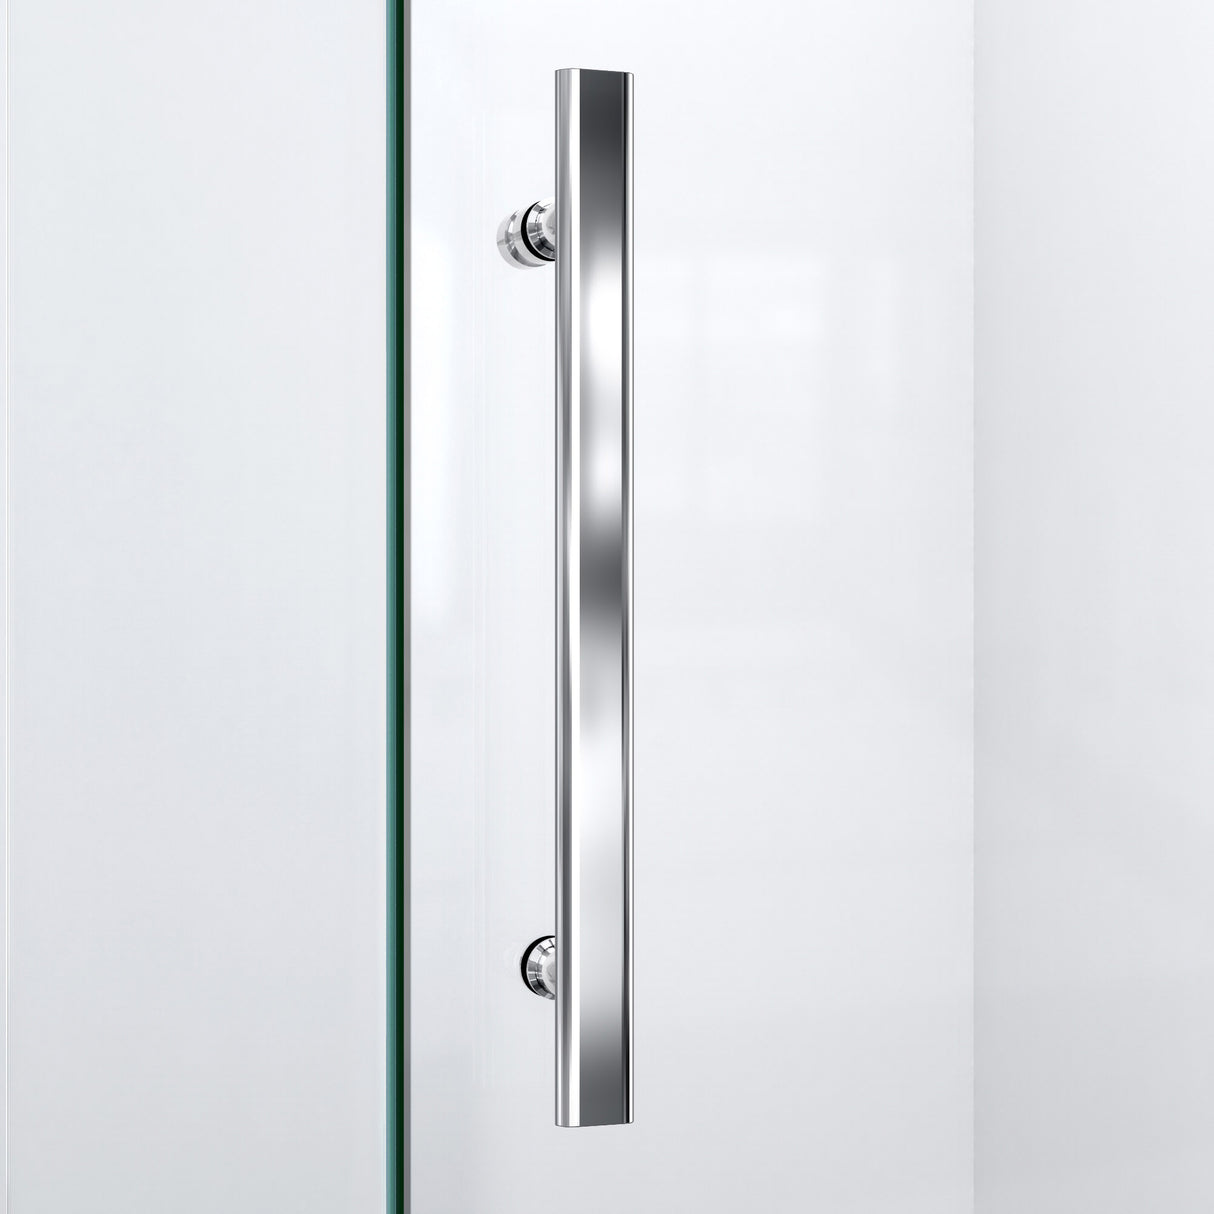 DreamLine Prism Plus 40 in. x 72 in. Frameless Neo-Angle Hinged Shower Enclosure in Chrome